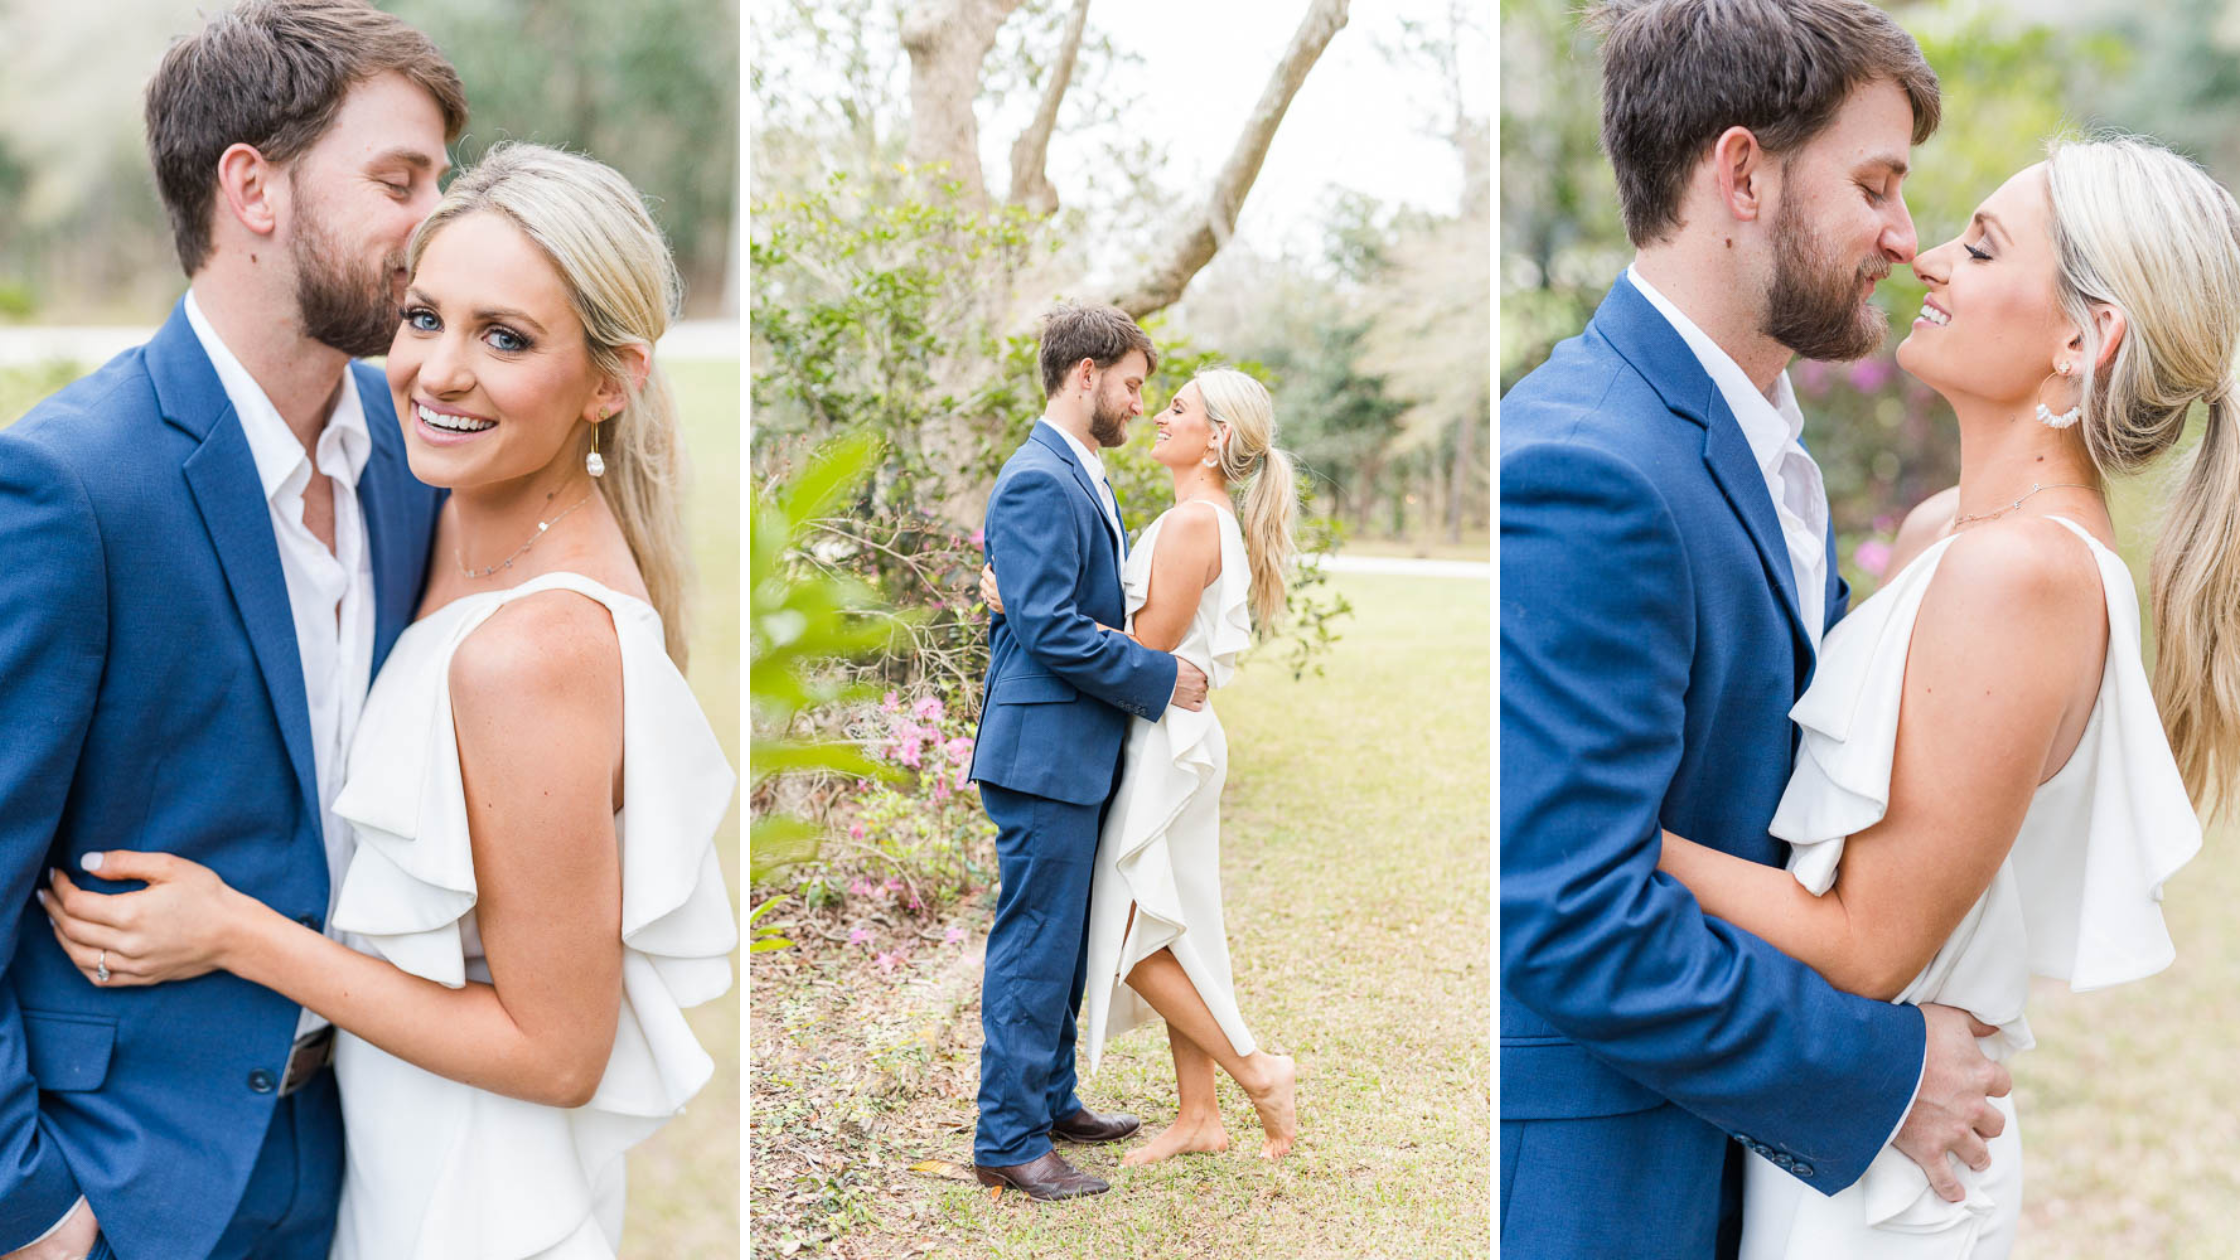 Private Land Engagement Session Photoshoot in Fairhope Alabama Photographed by Kristen Marcus Photography